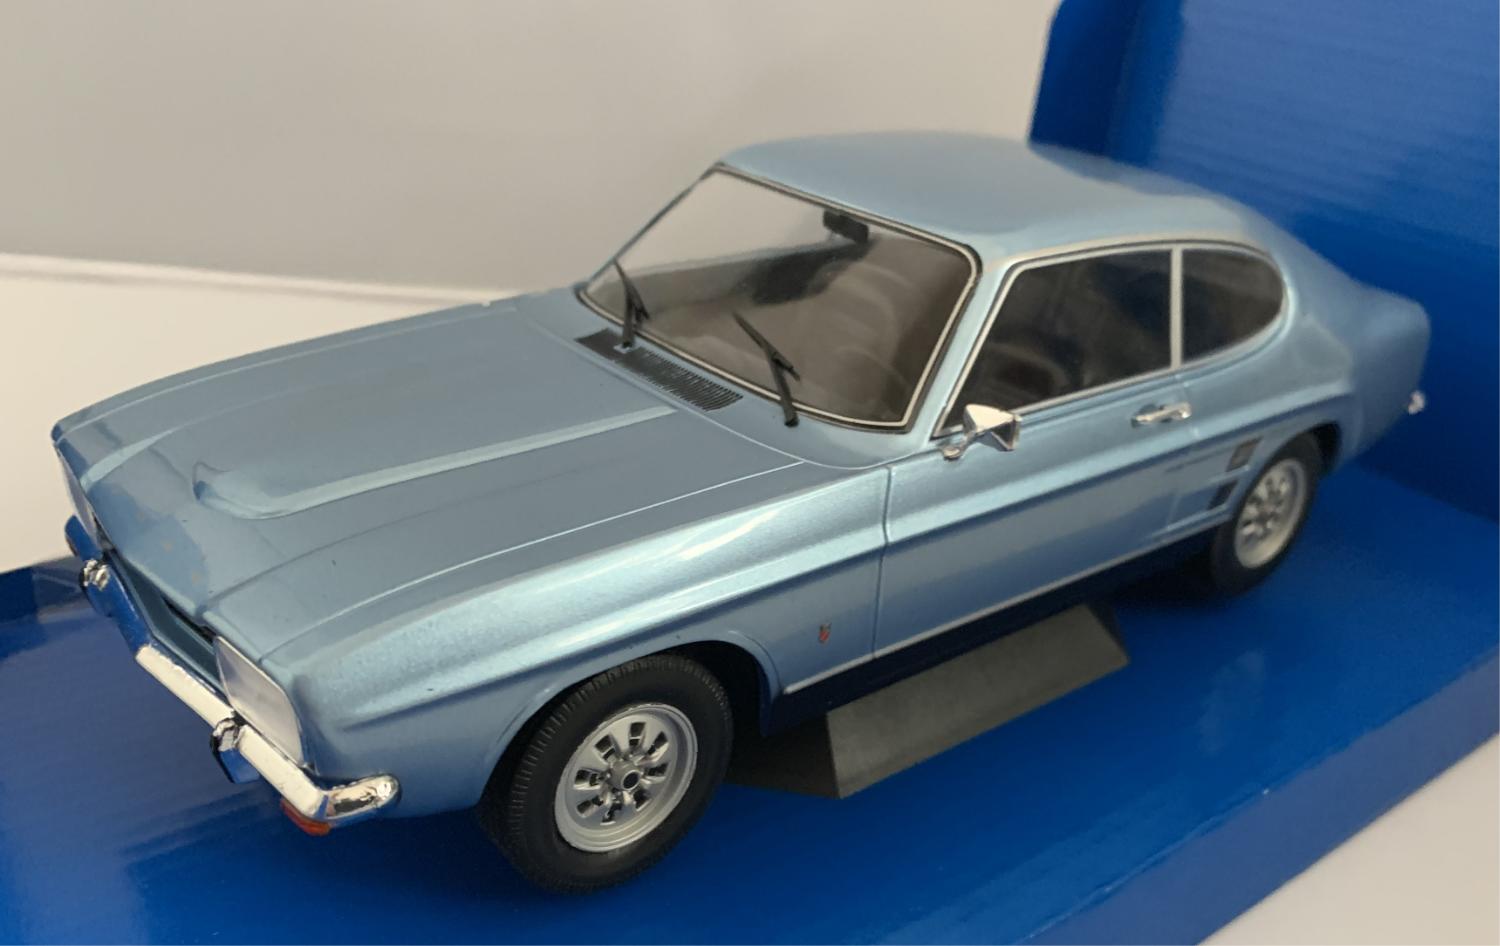 An excellent scale model of the Ford Capri 1600XL with high level of detail throughout, all authentically recreated. Model is presented in a window display box. The car is approx. 23 cm long and the presentation box is 32 cm long